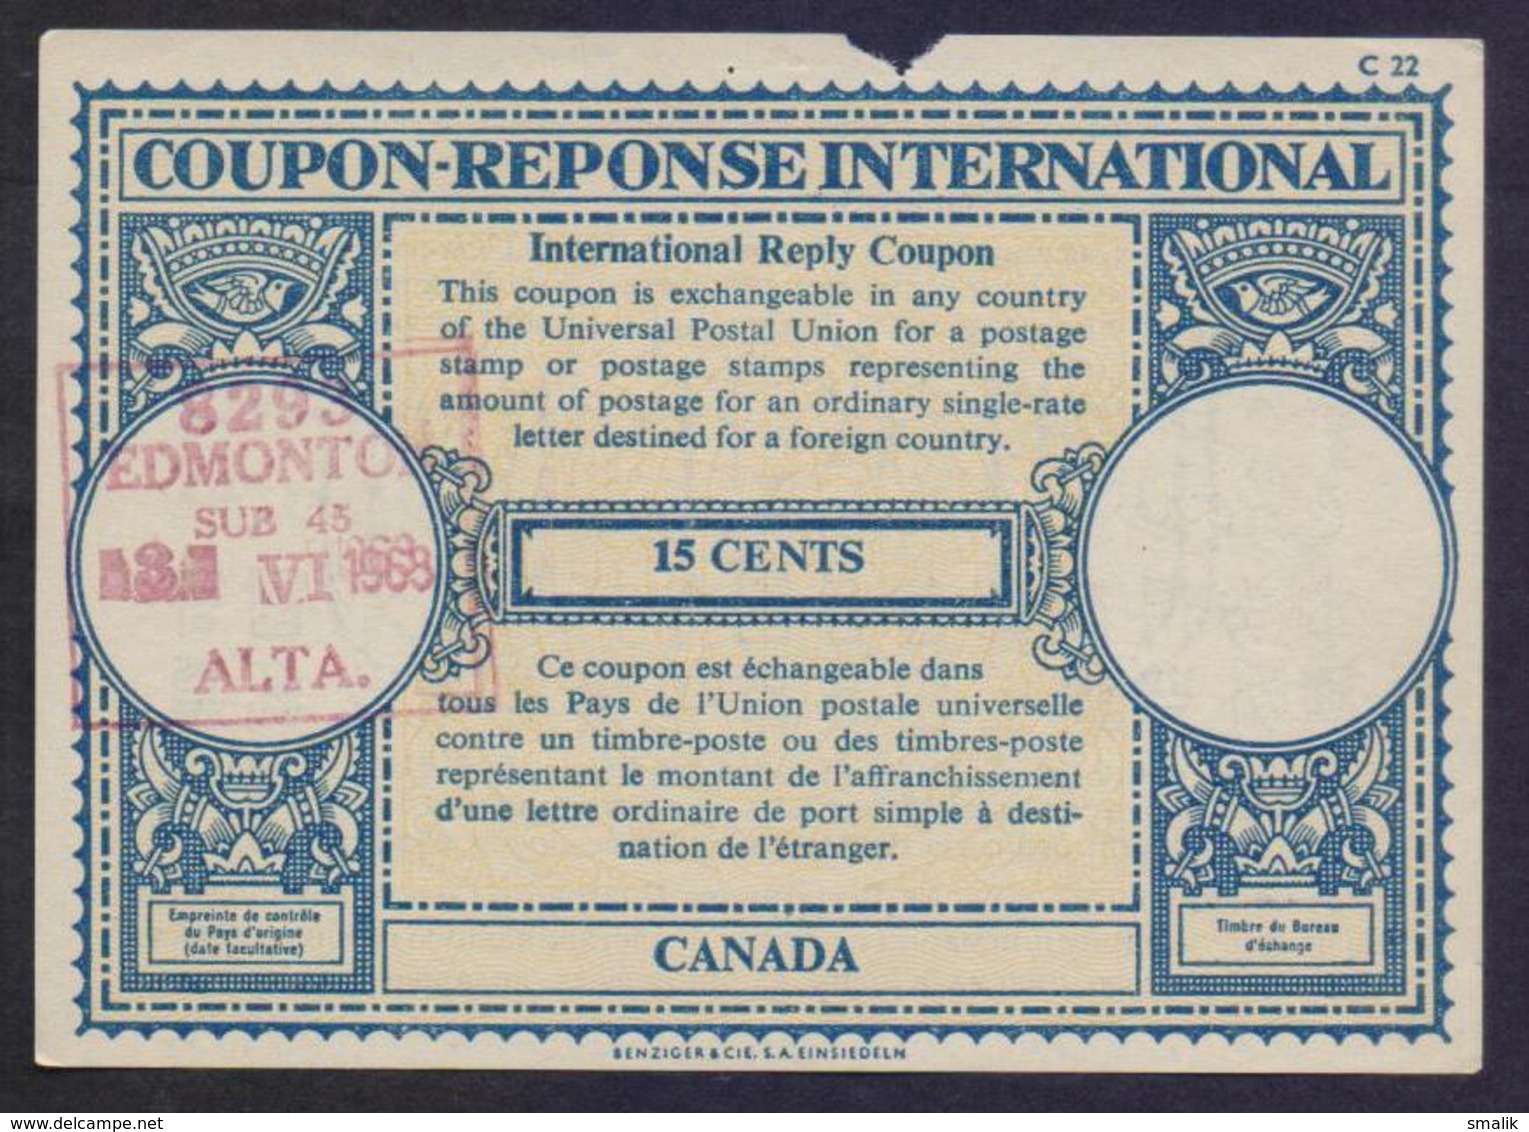 CANADA - 15 Cents London Type IRC COUPON REPONSE INTERNATIONAL REPLY, UPU, Cancelled 3.6.1968, Minor Broken - Cupones Respuesta